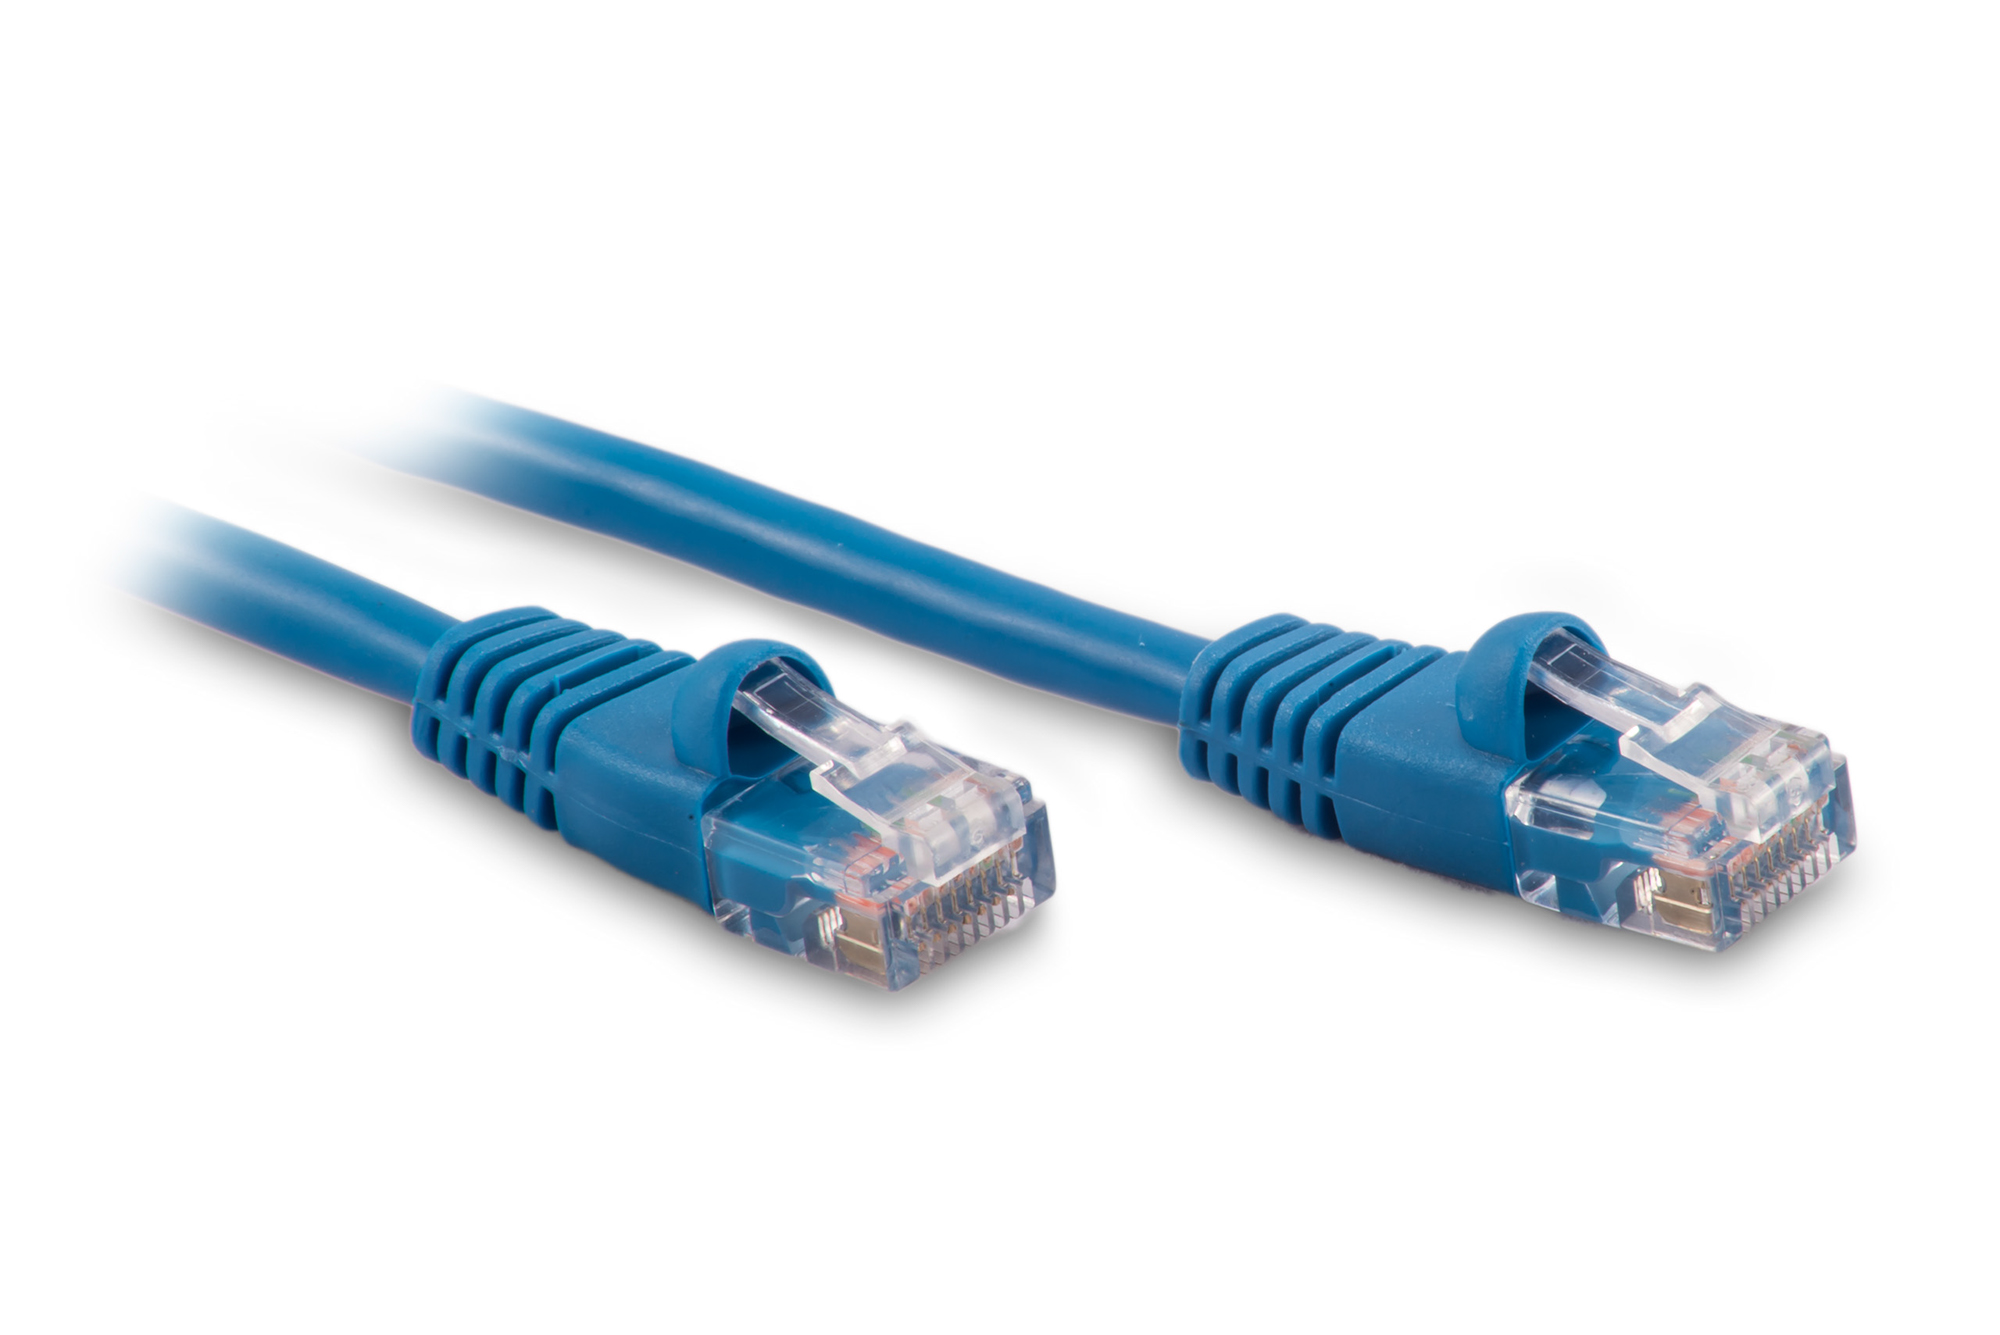 50ft Cat5e Ethernet Patch Cable - Blue Color - Snagless Boot